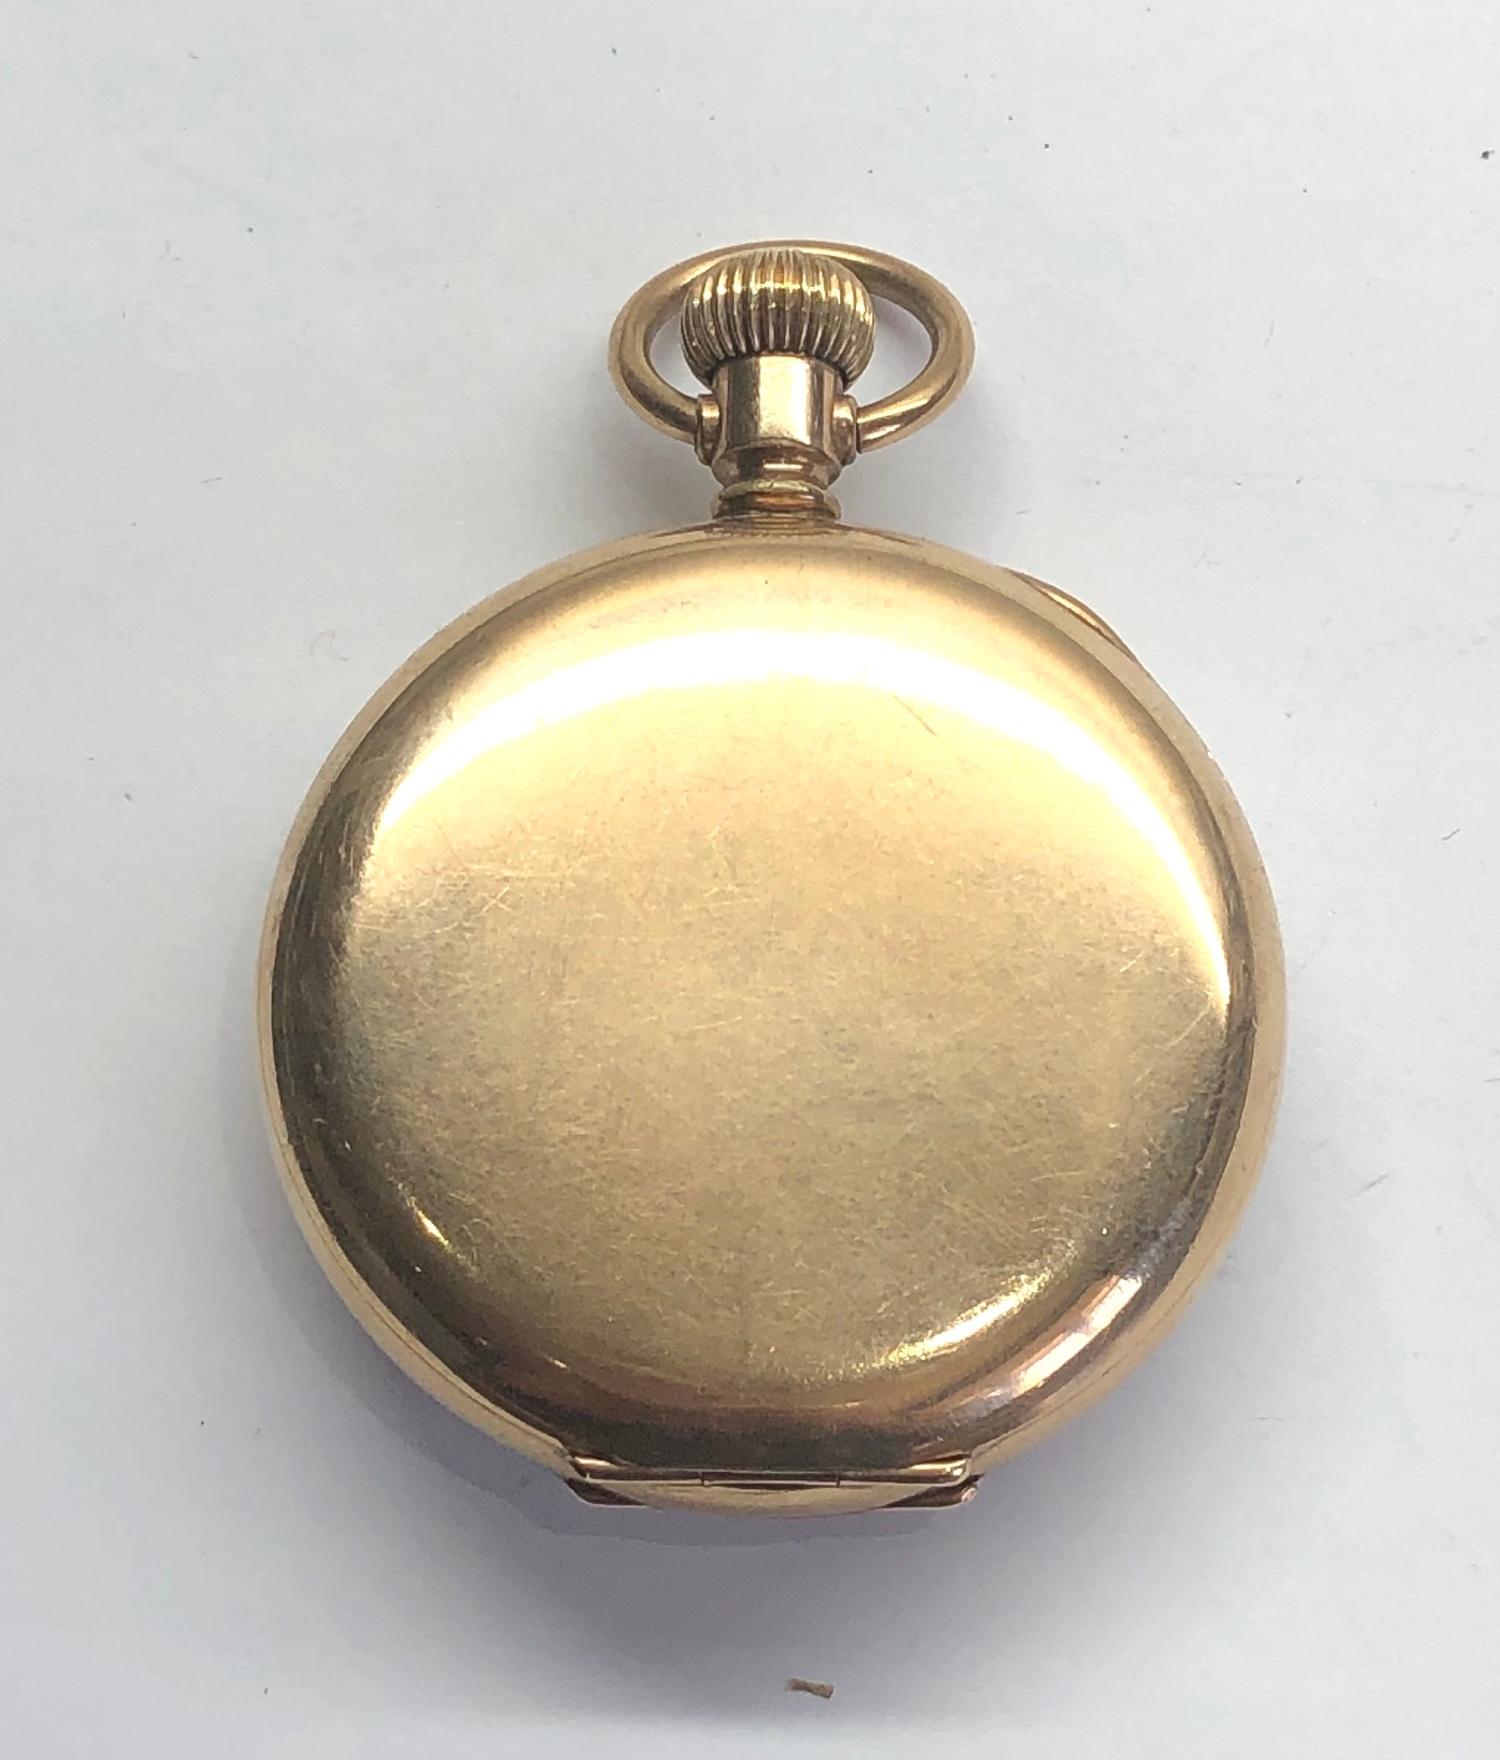 Bulla gold plated open face pocket watch - Image 2 of 3